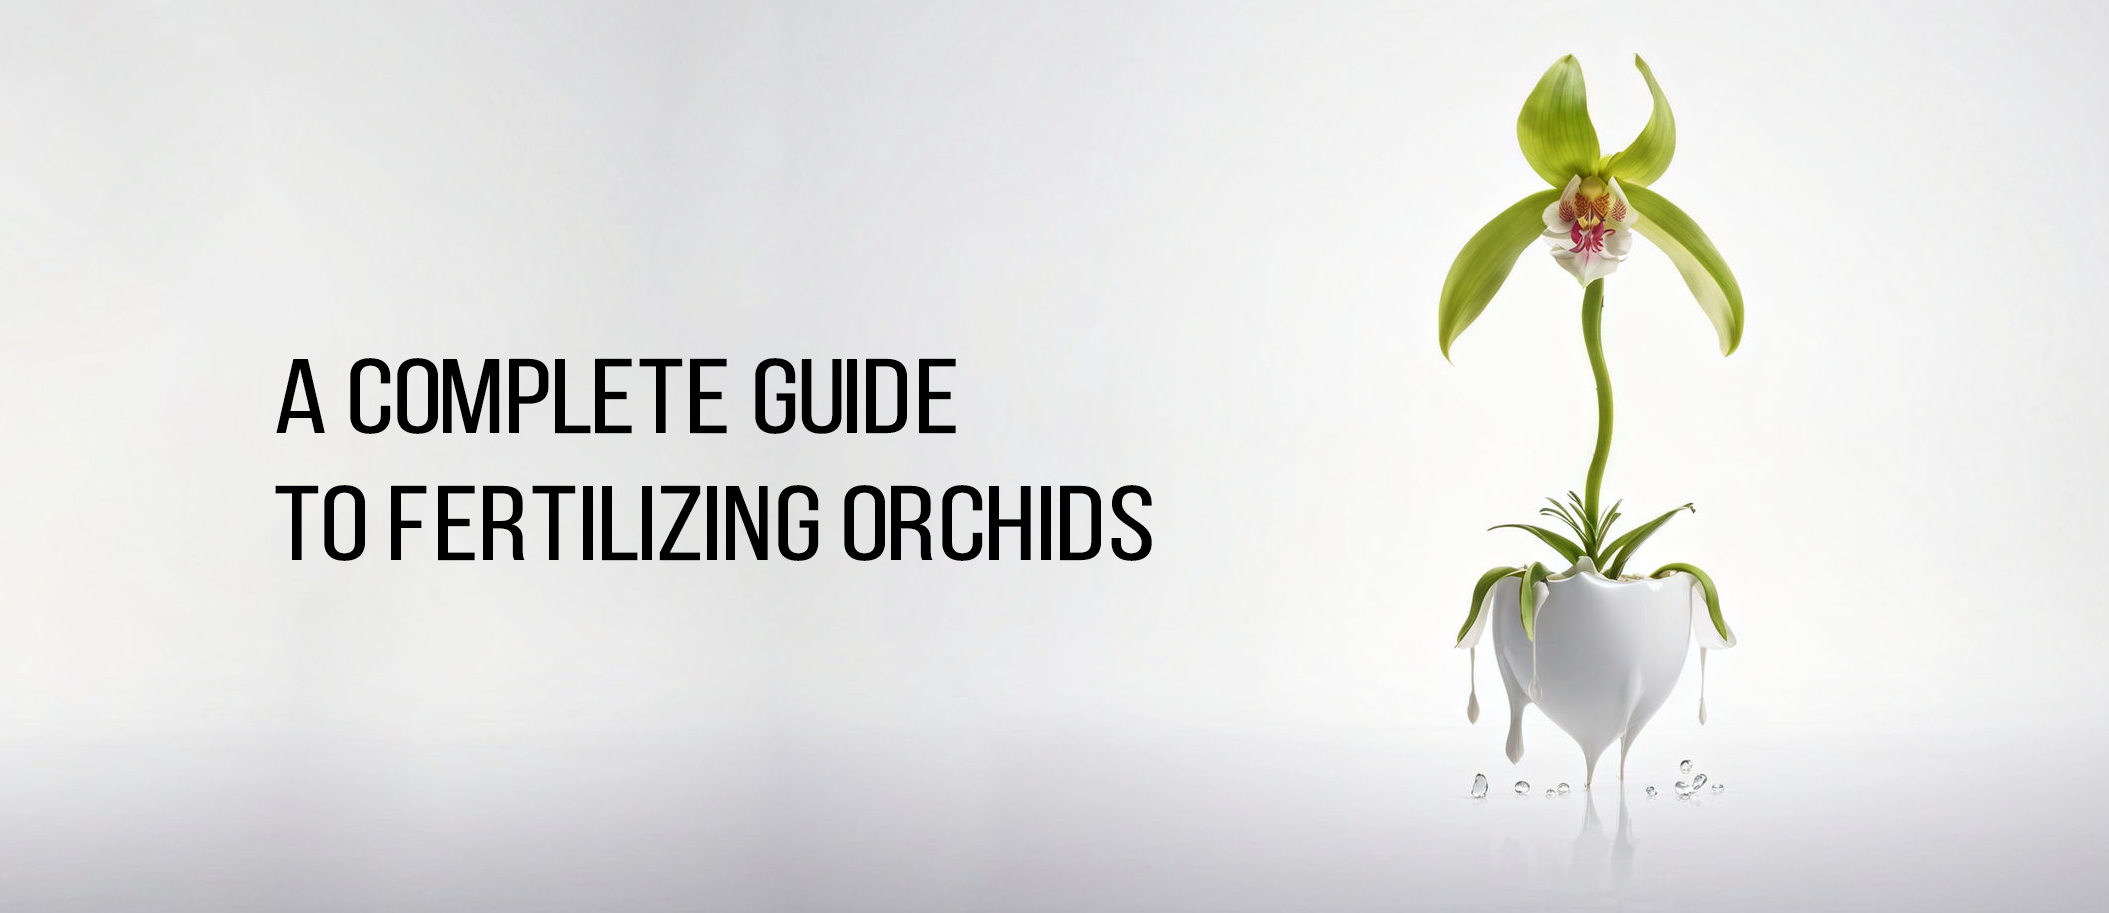 A Complete Guide to Fertilizing Orchids